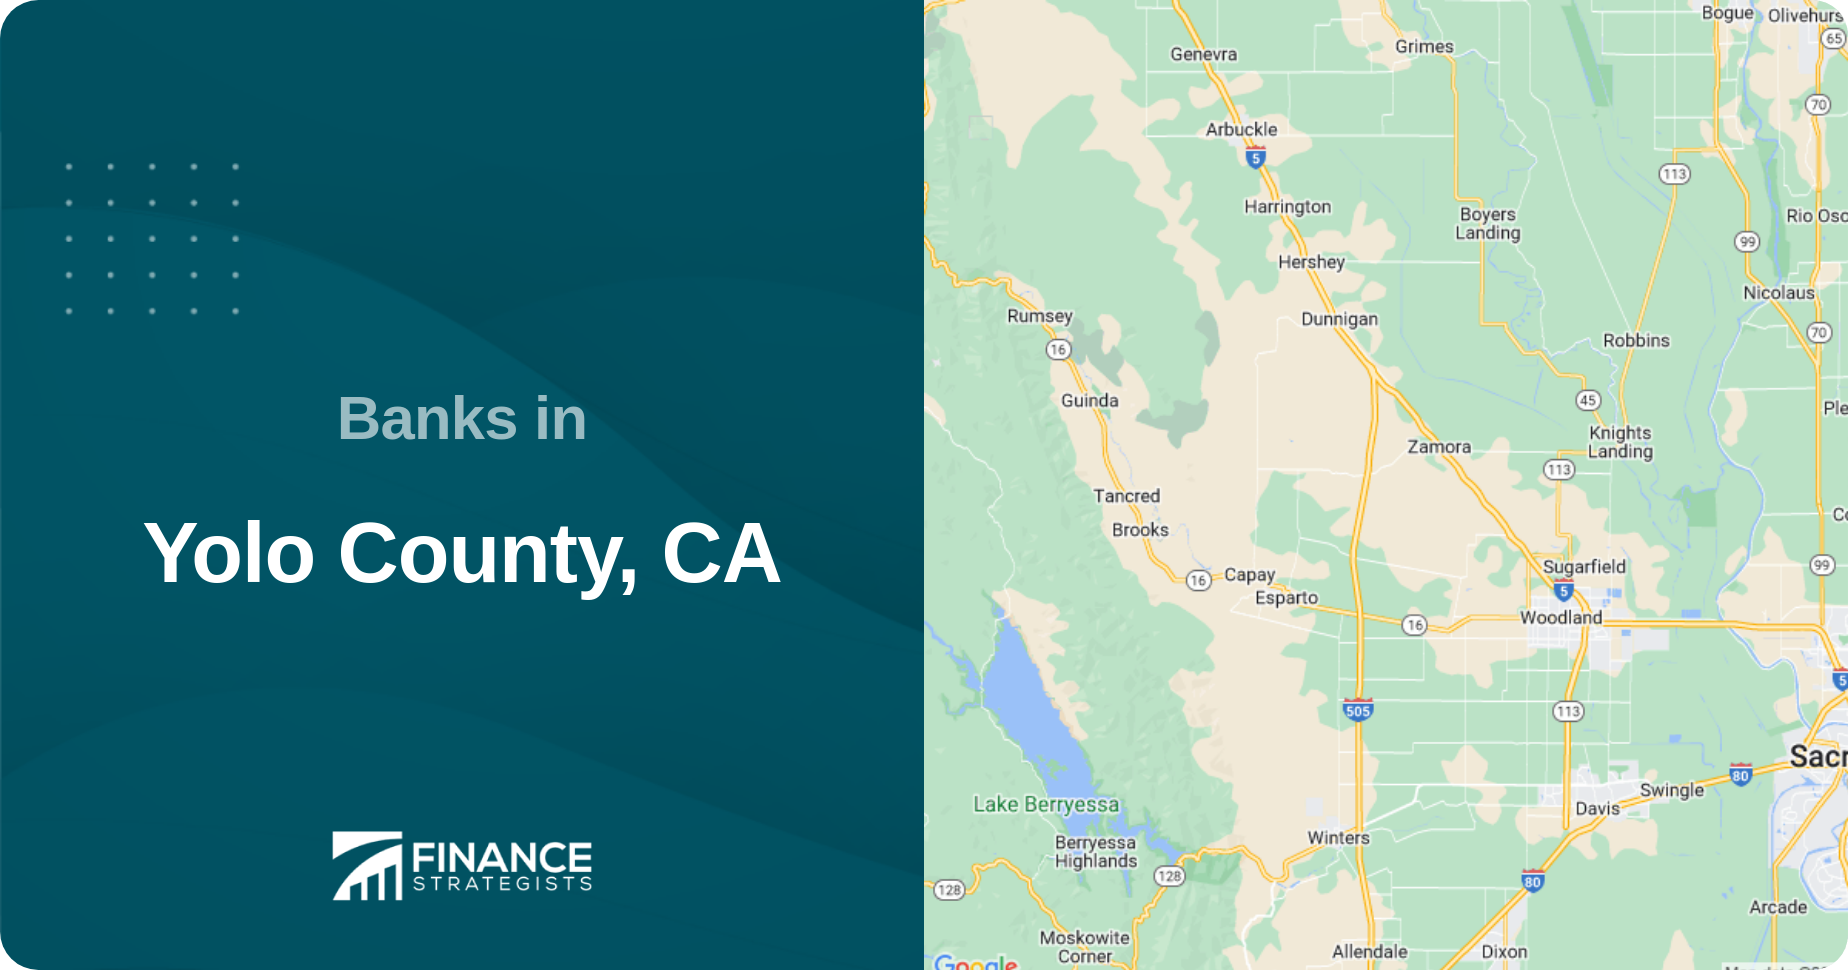 Banks in Yolo County, CA